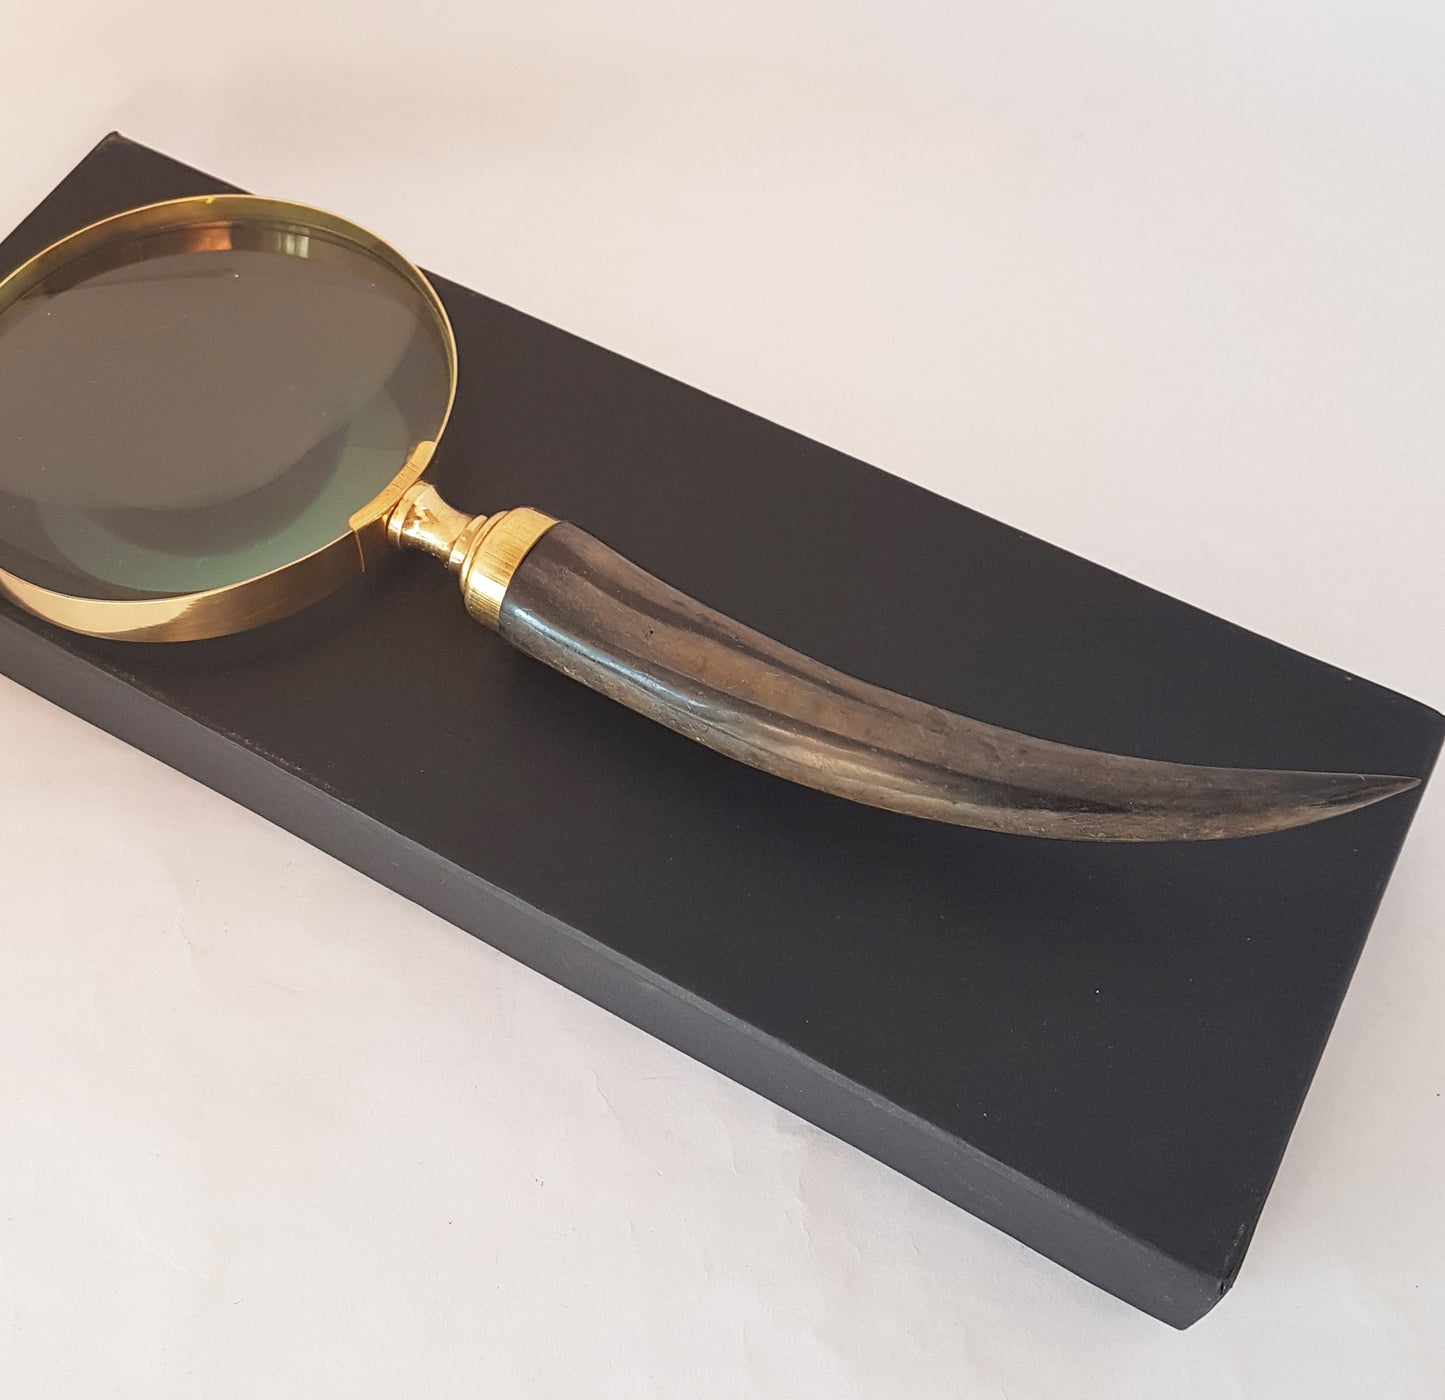 Vintage style magnifying glass hand lens with a curled horn handle. Old world charm. Read small print easily, use for home & hobby. 10 inch.